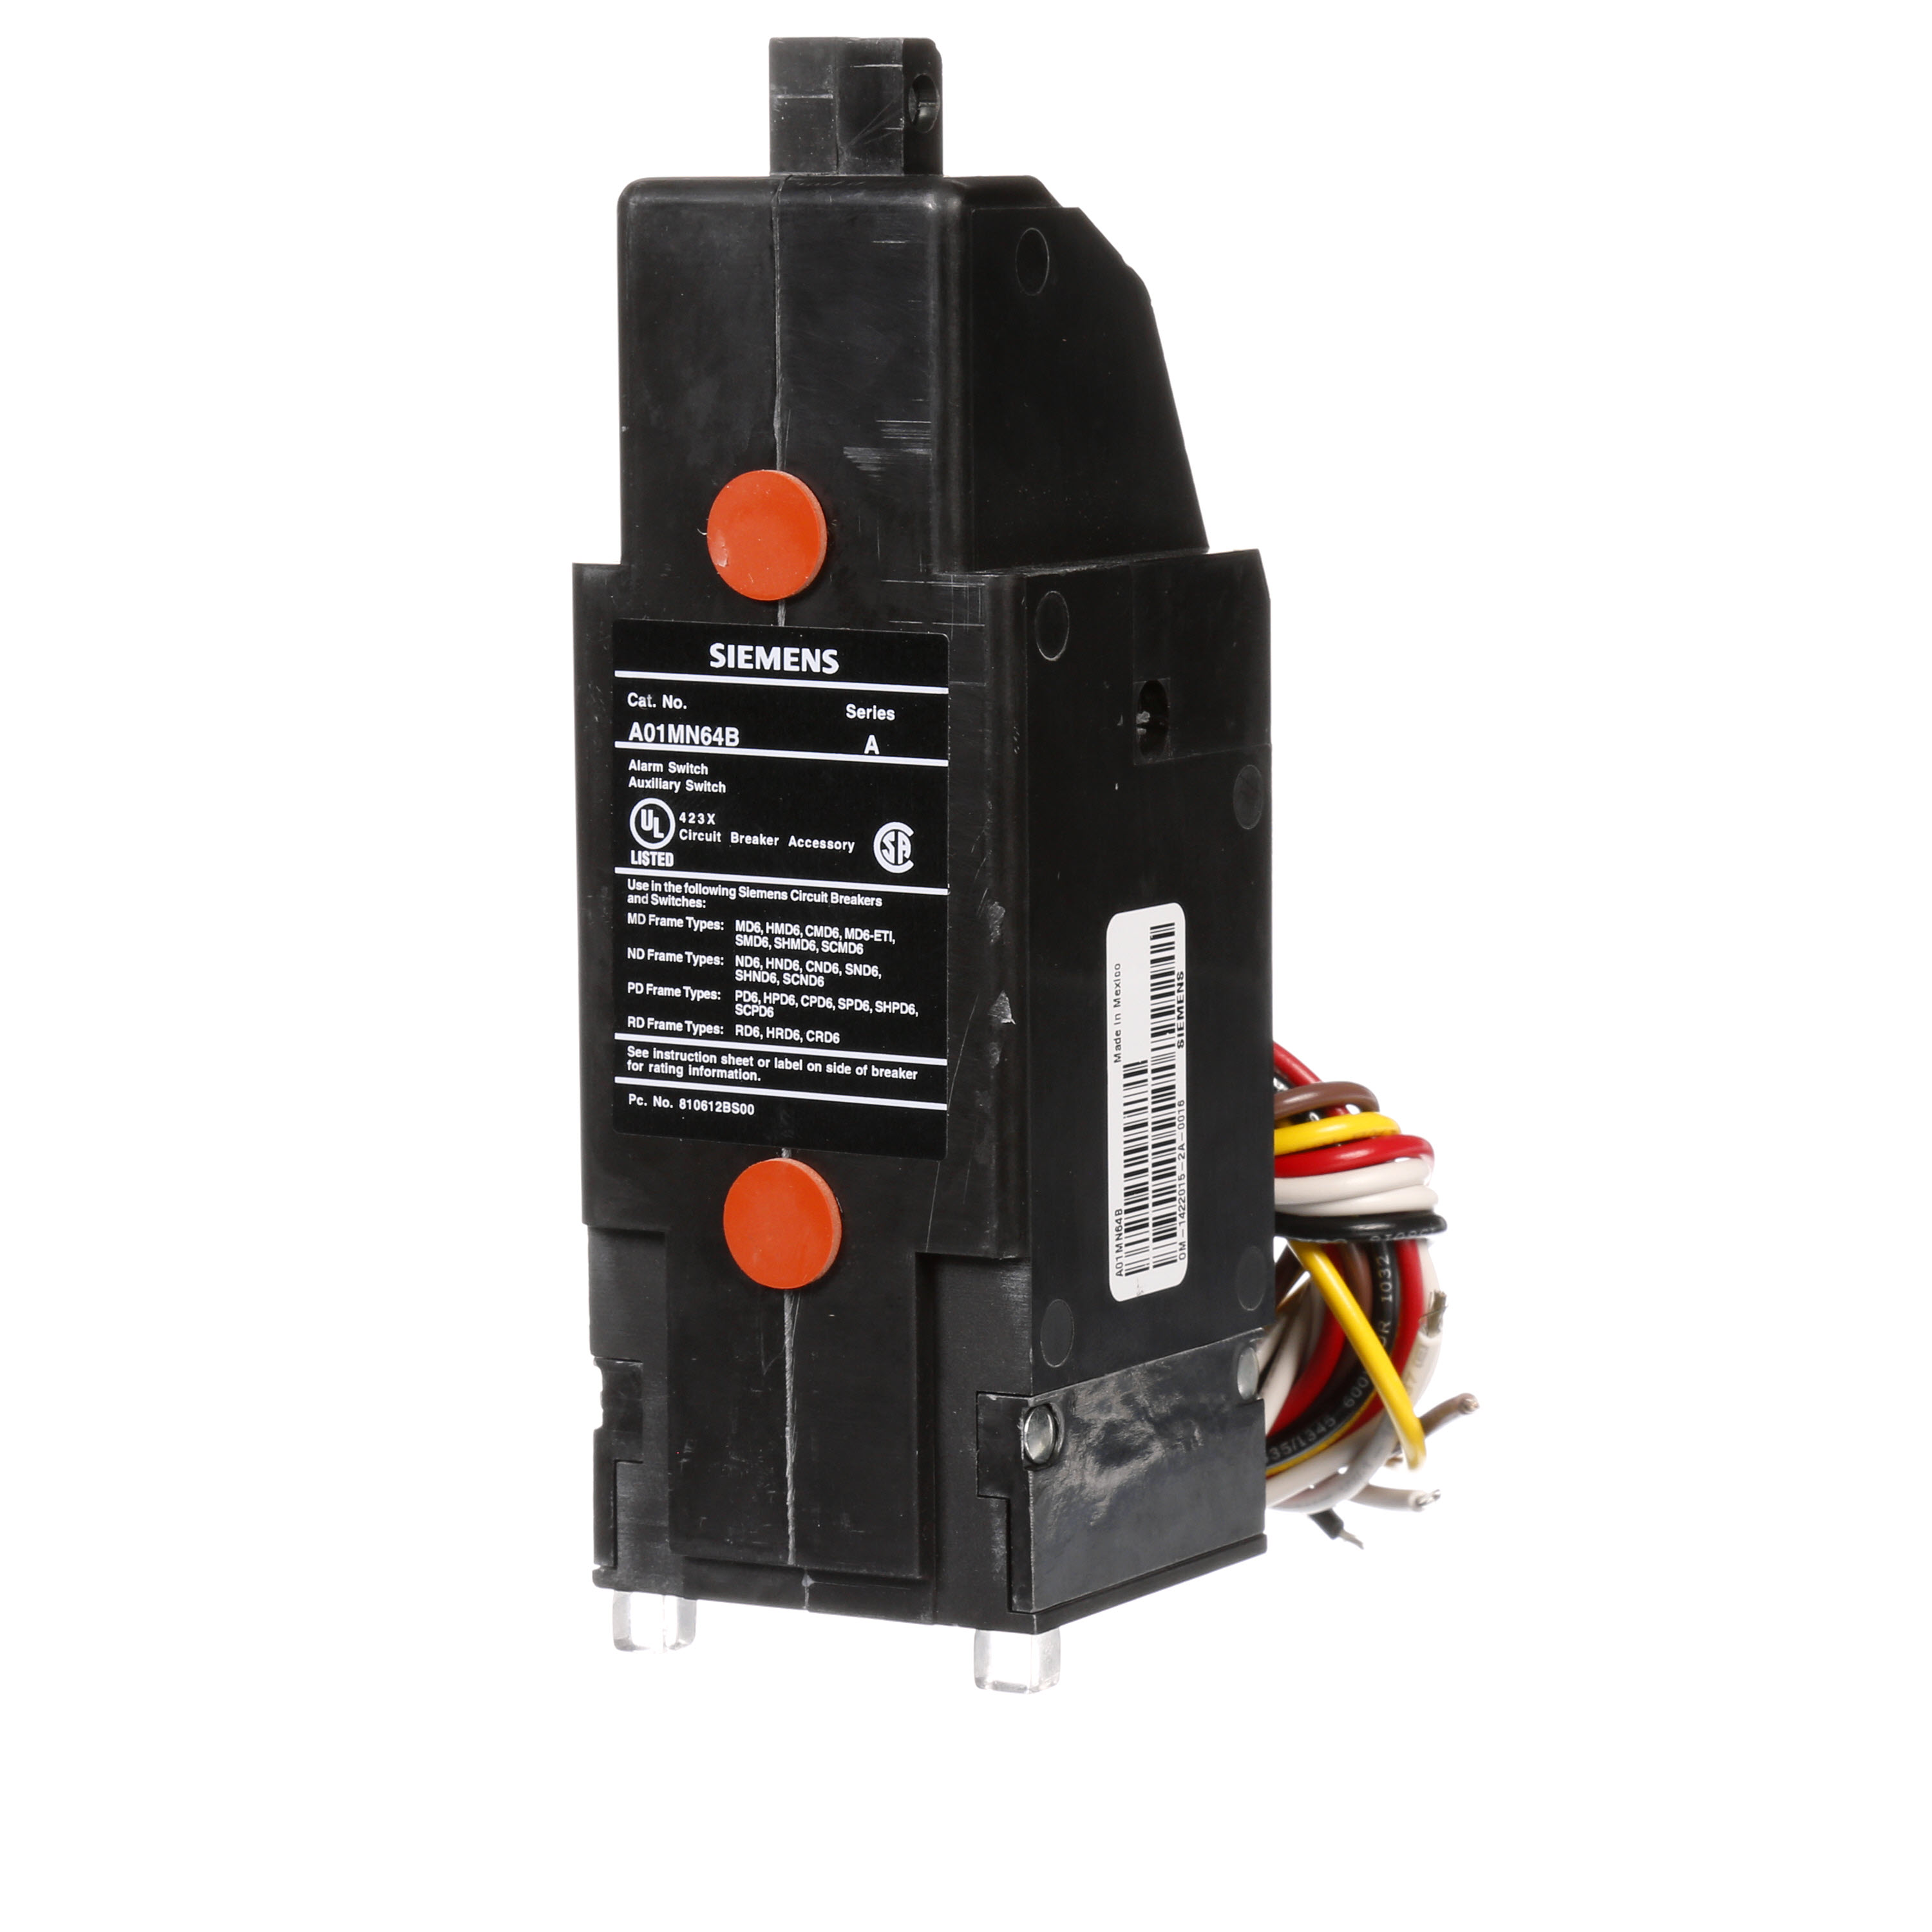 SIEMENS LOW VOLTAGE SENTRON MOLDED CASE CIRCUIT BREAKER INTERNAL ACCESSORY. 480VAC BELL ALARM COMBINATION WITH FORM C 480 VAC AUXILIARY SWITCH (1NO / 1NC). SUITS MD / ND / PD / RD FRAME BREAKERS.